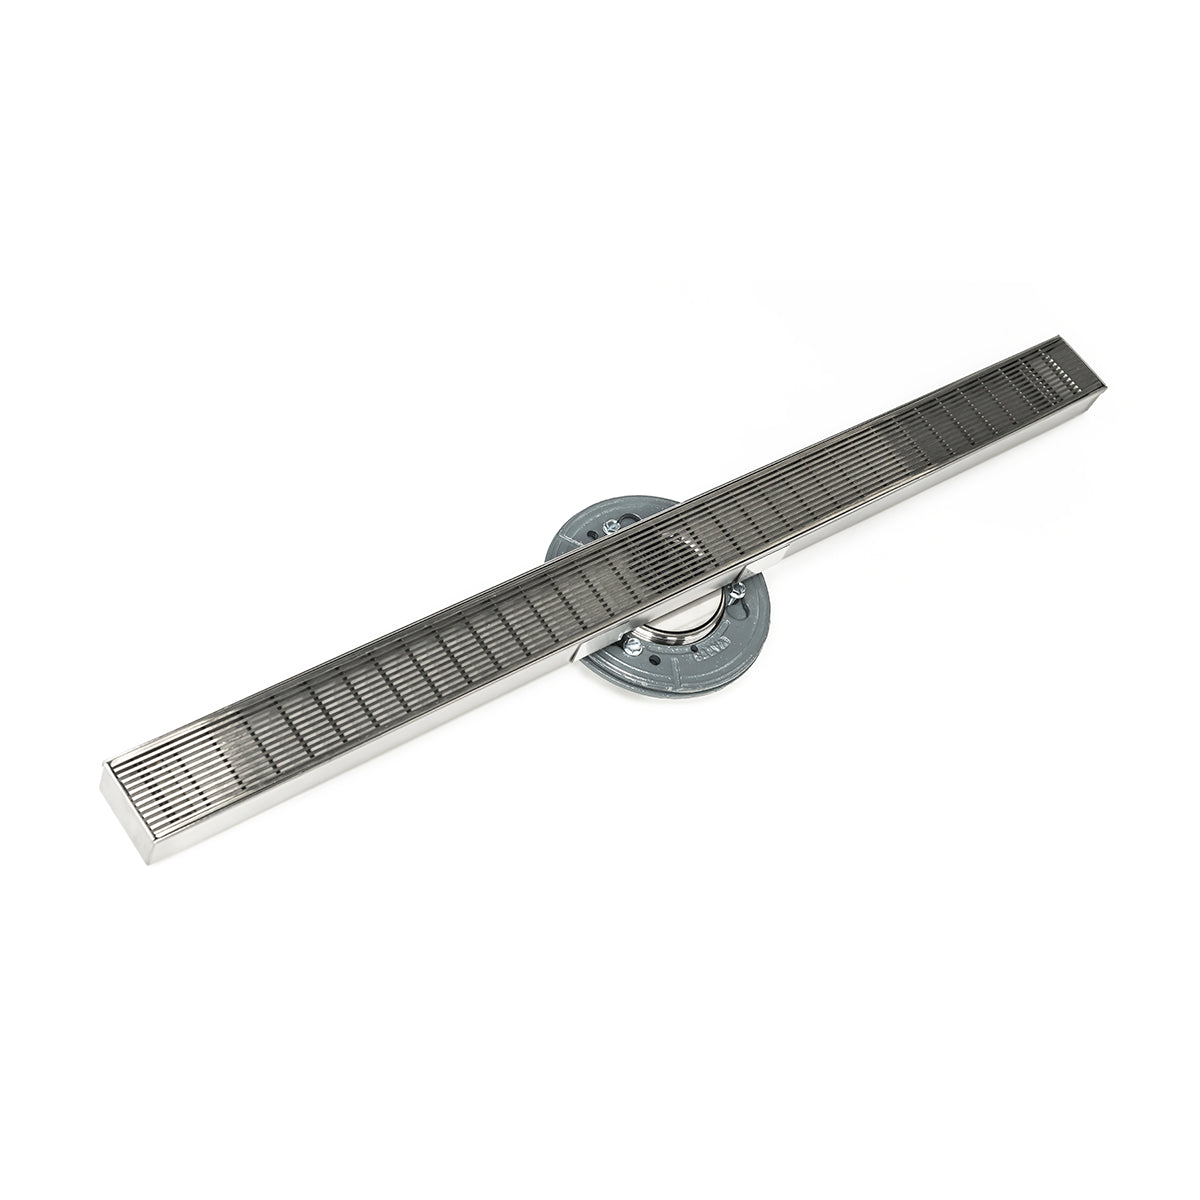 Infinity Drain 96" S-Stainless Steel Series High Flow Site Sizable Linear Drain Kit with 2 1/2" Wedge Wire Grate with Cast Iron Drain Body, 3" No Hub Outlet